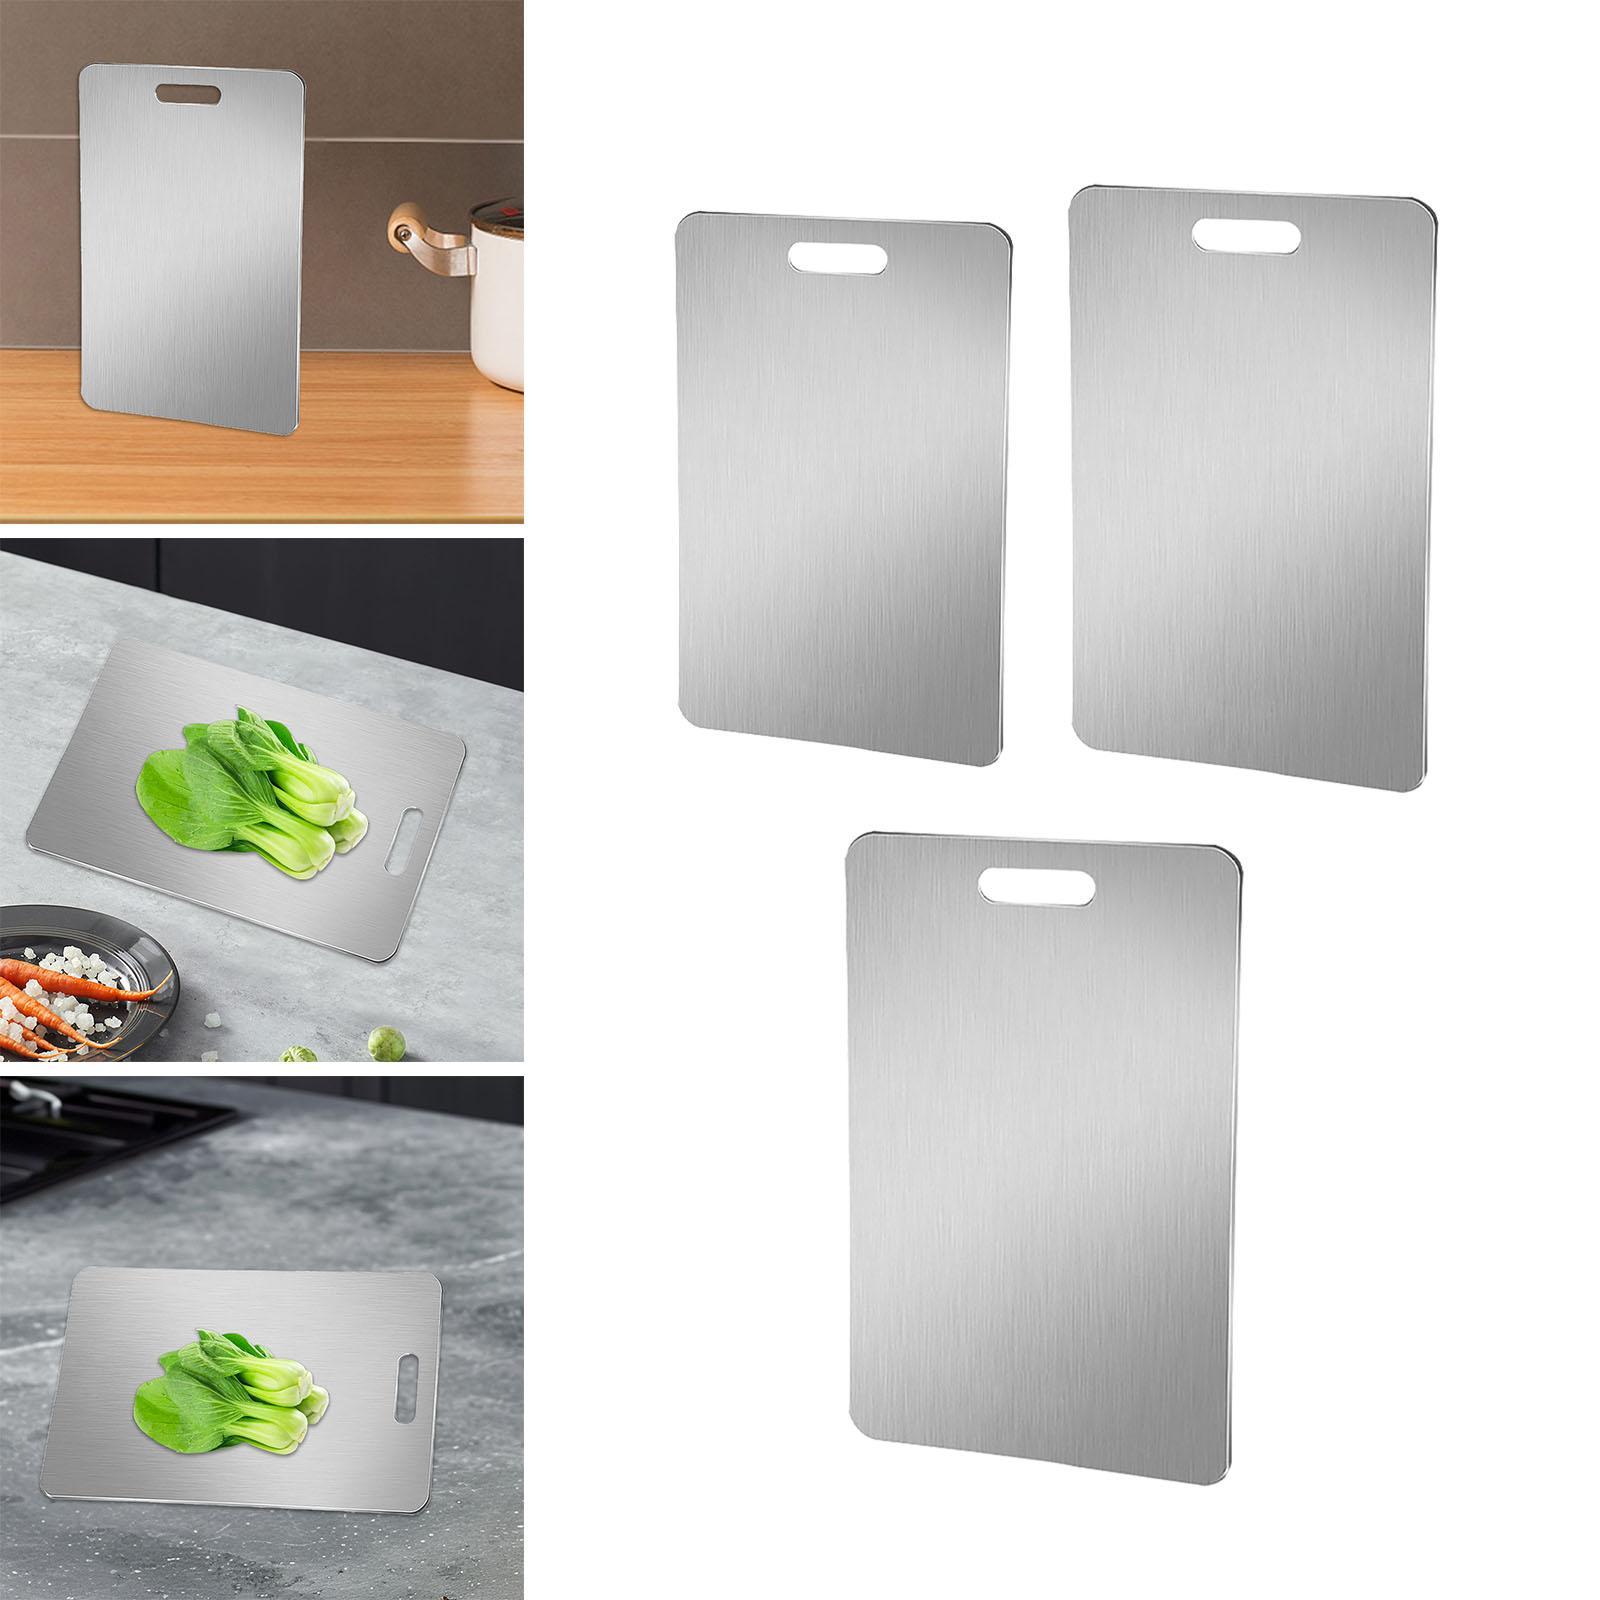 Stainless Steel Cutting Board Pizza Biscuits Board Sturdy Meat Thawing Plate Small